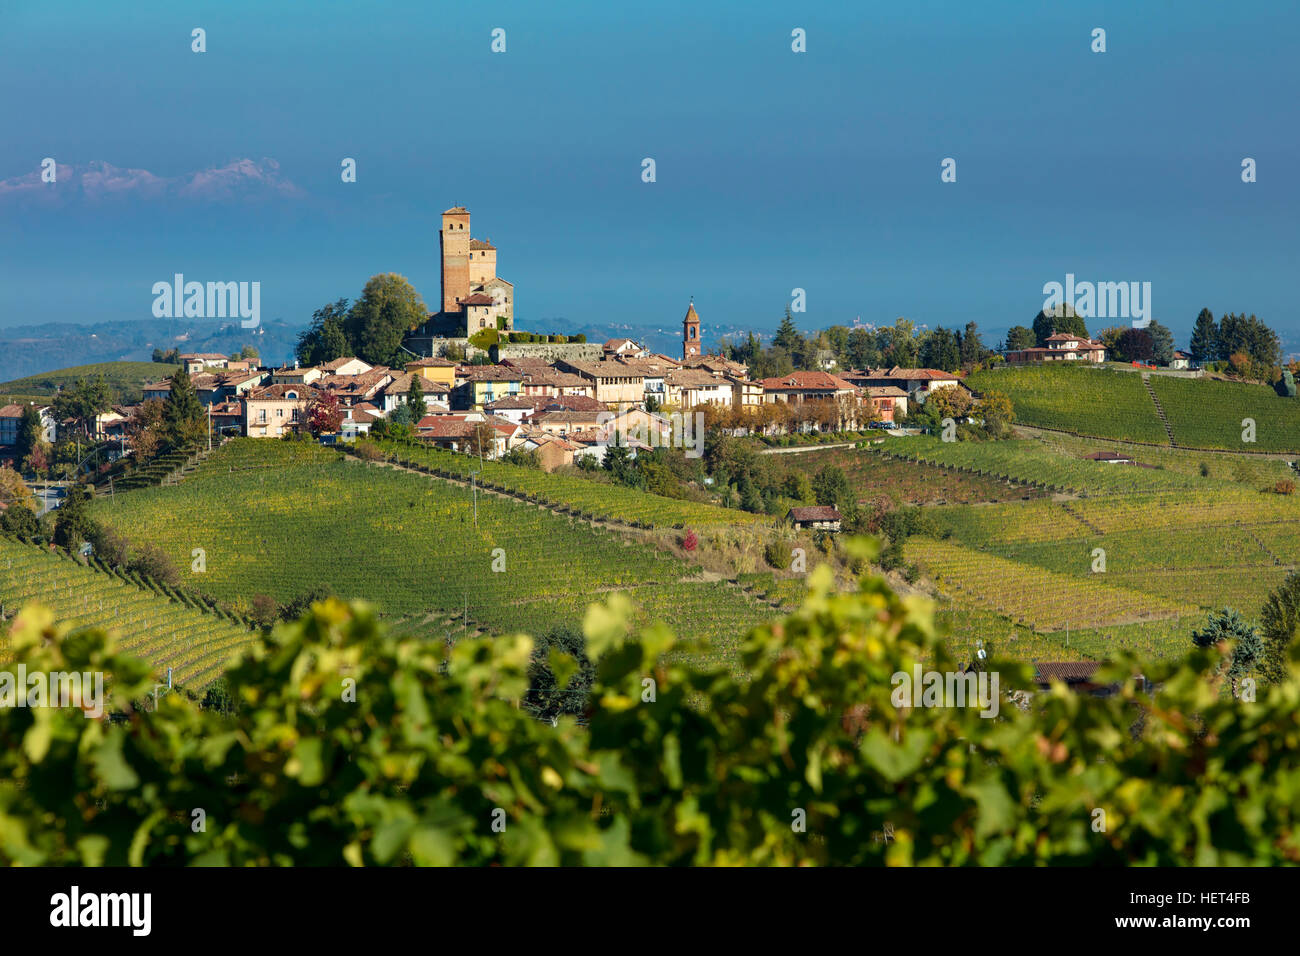 Morning view over vineyards with town of Serralunga d'Alba beyond, Piemonte, Italy Stock Photo